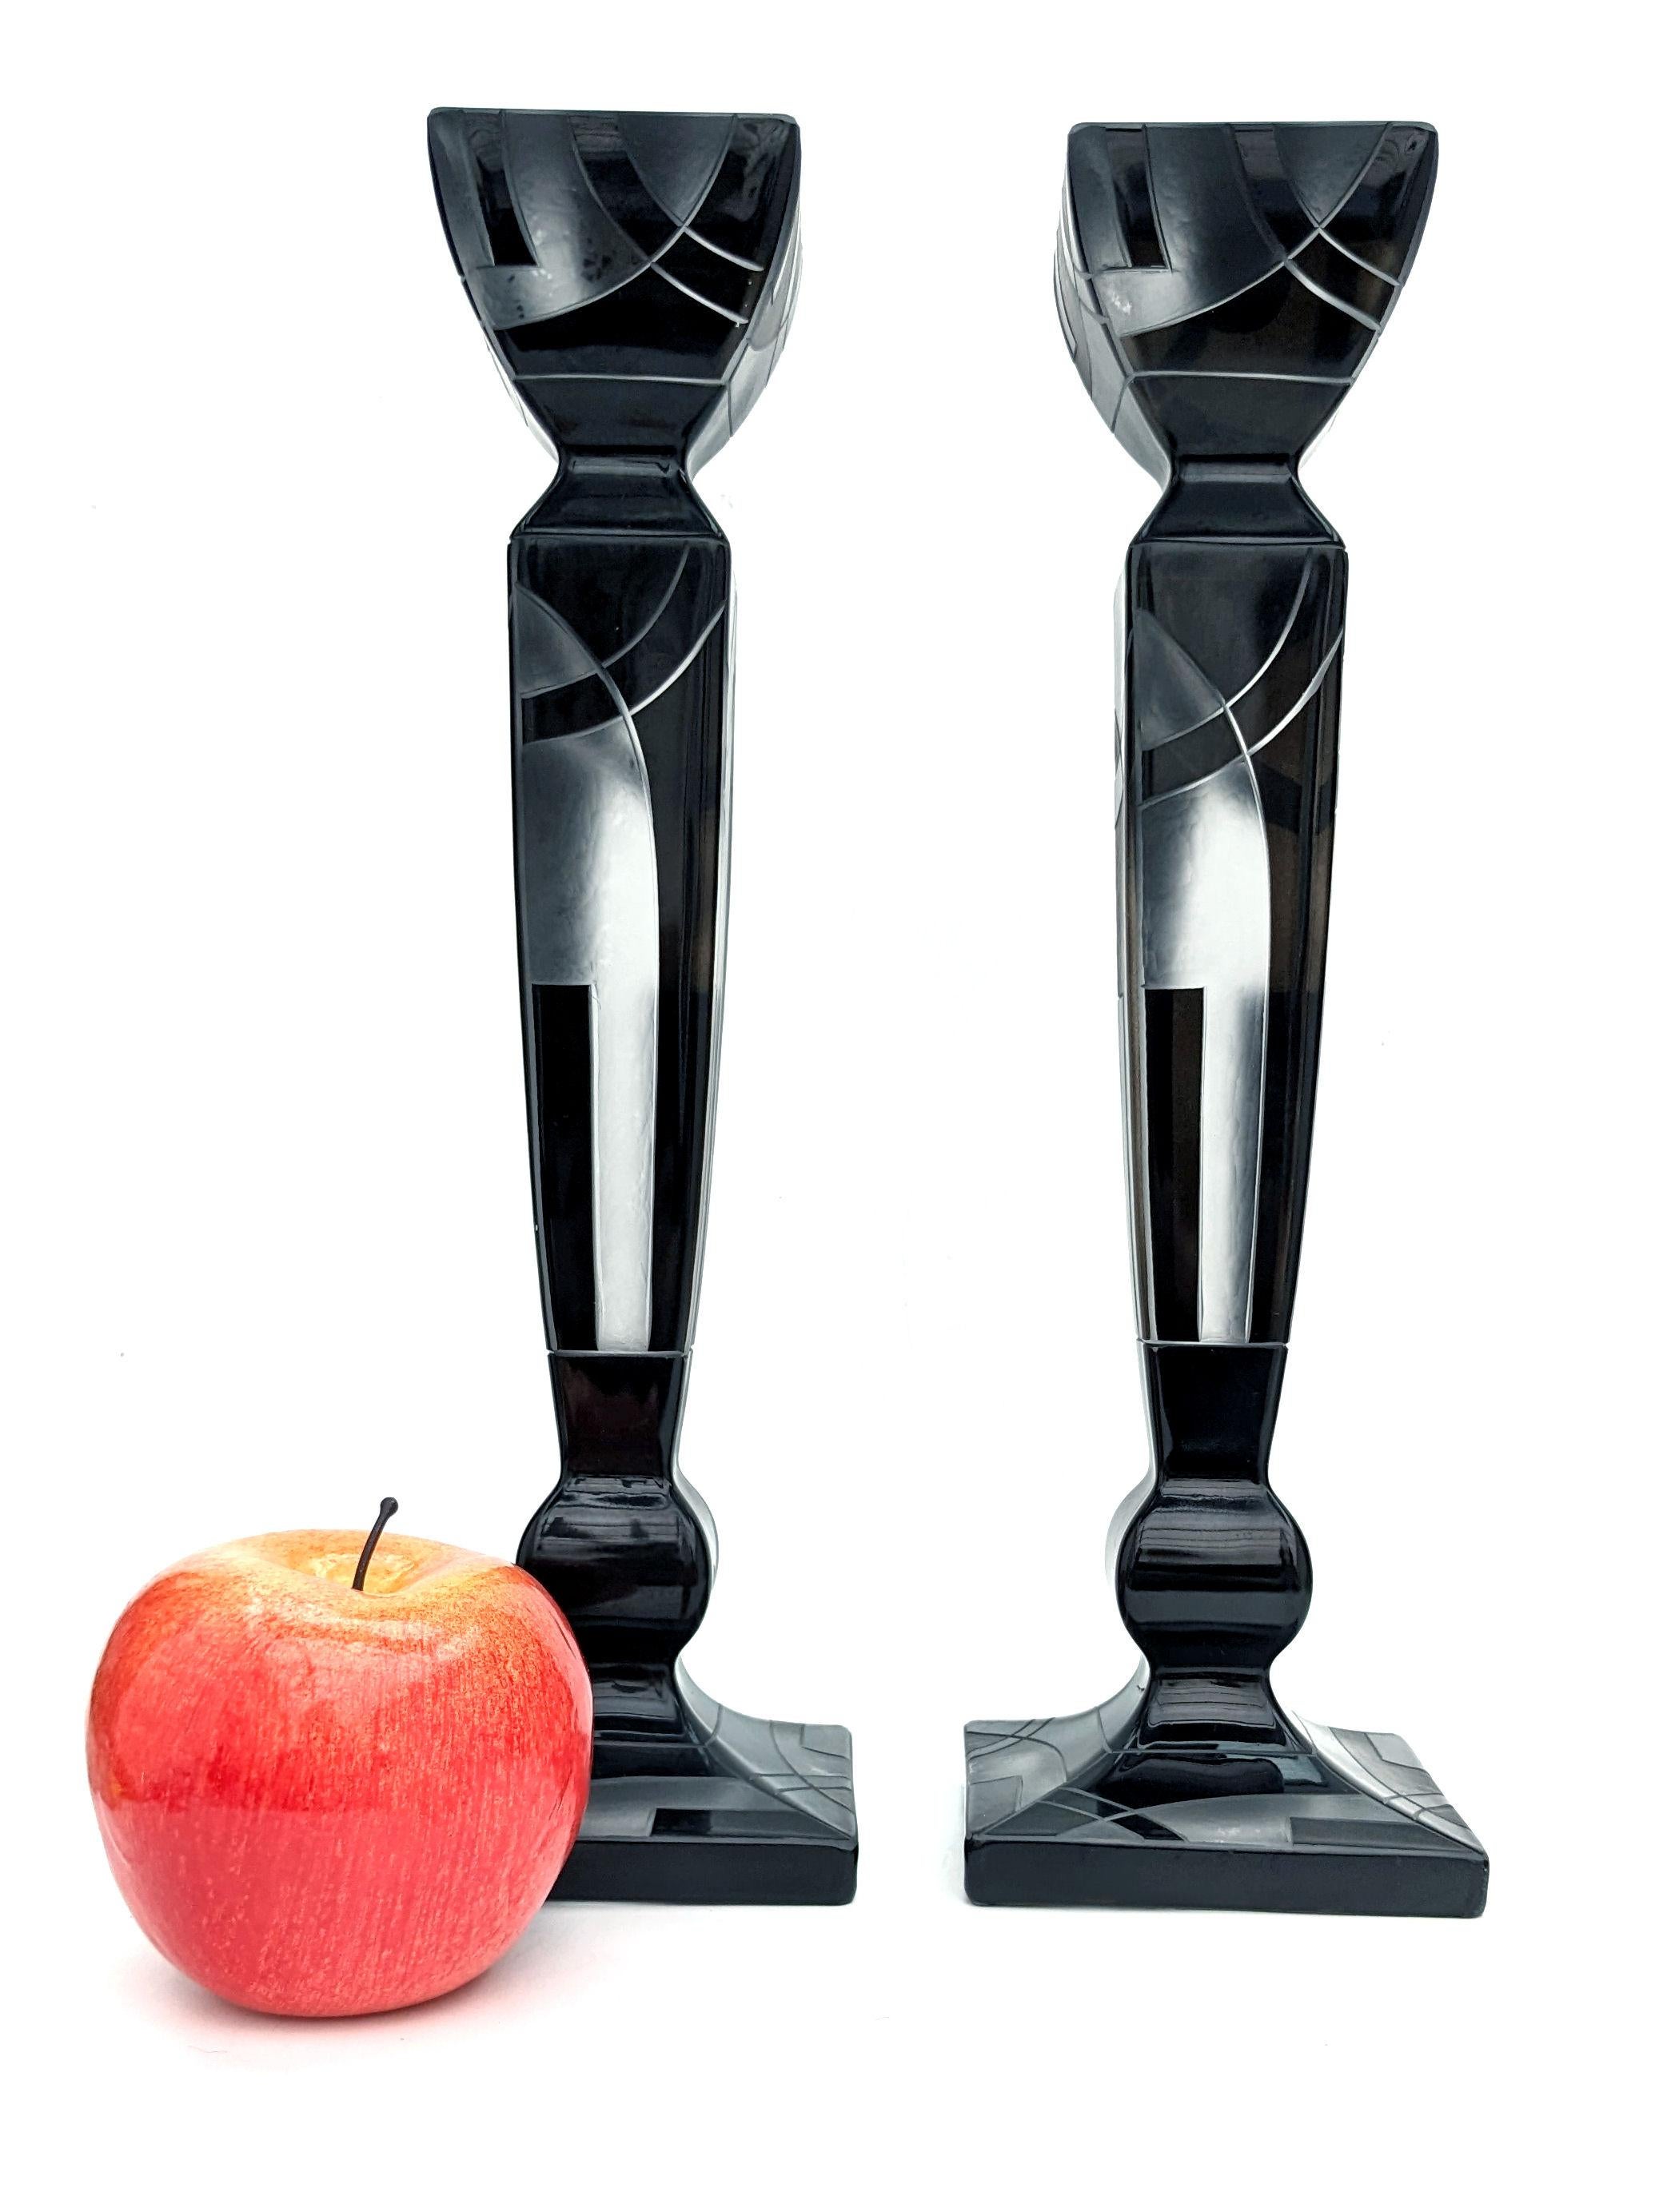 Standing a whooping 31 cm tall are these outstanding matching pair of original Art Deco Czech glass candle sticks. These really do have the wow factor. Black enamel geometrically decorated with frosted and acid etched detailing. Both candle holders